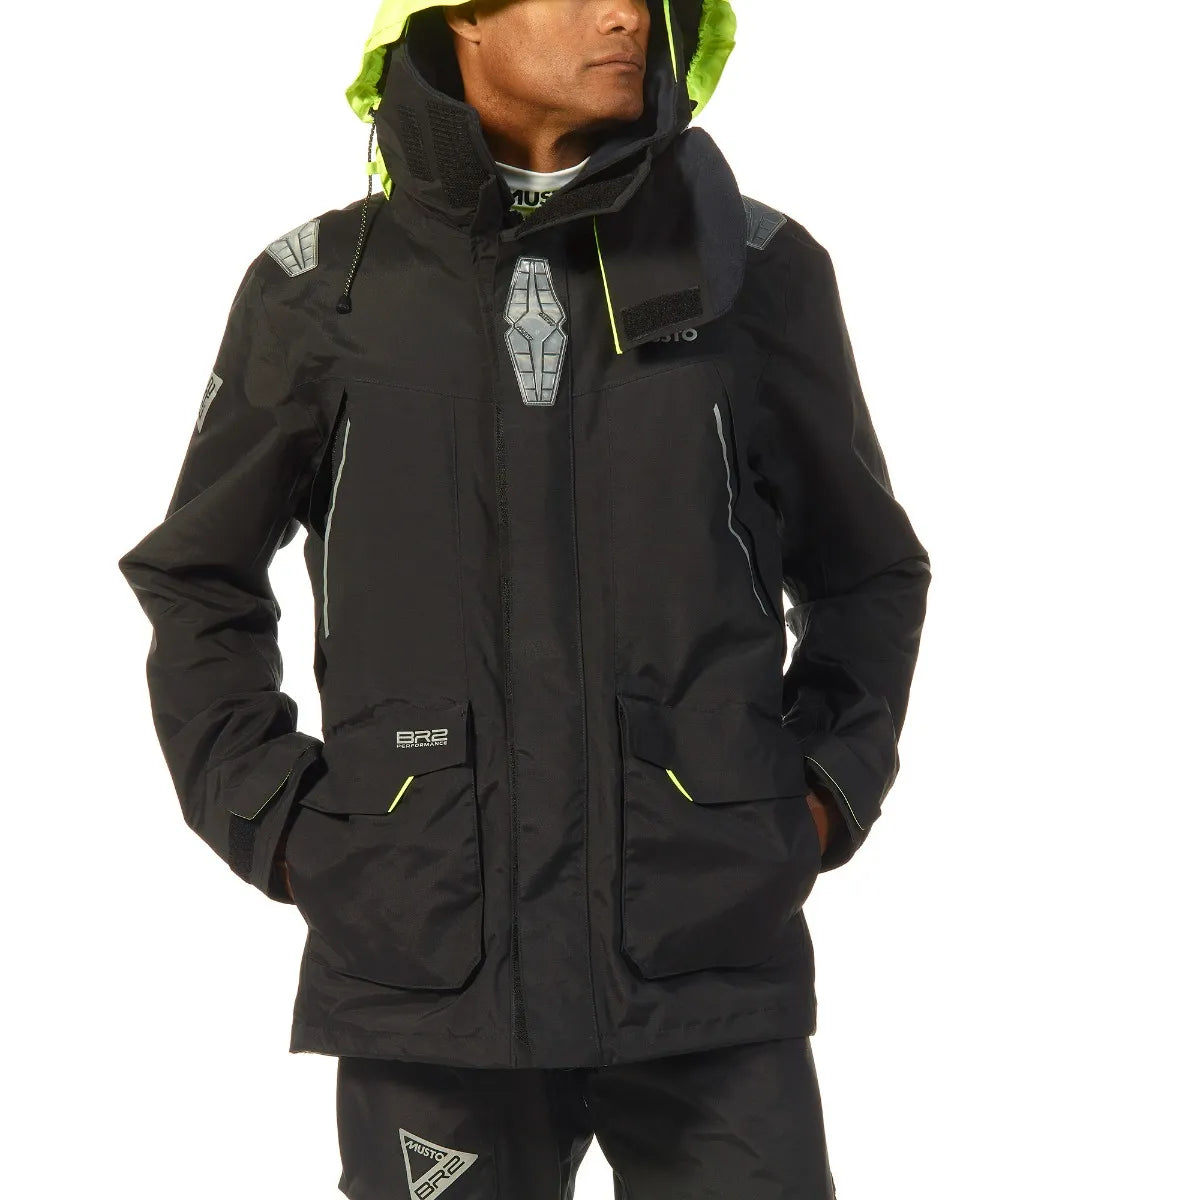 MUSTO BR2 OFFSHORE JACKE 2.0